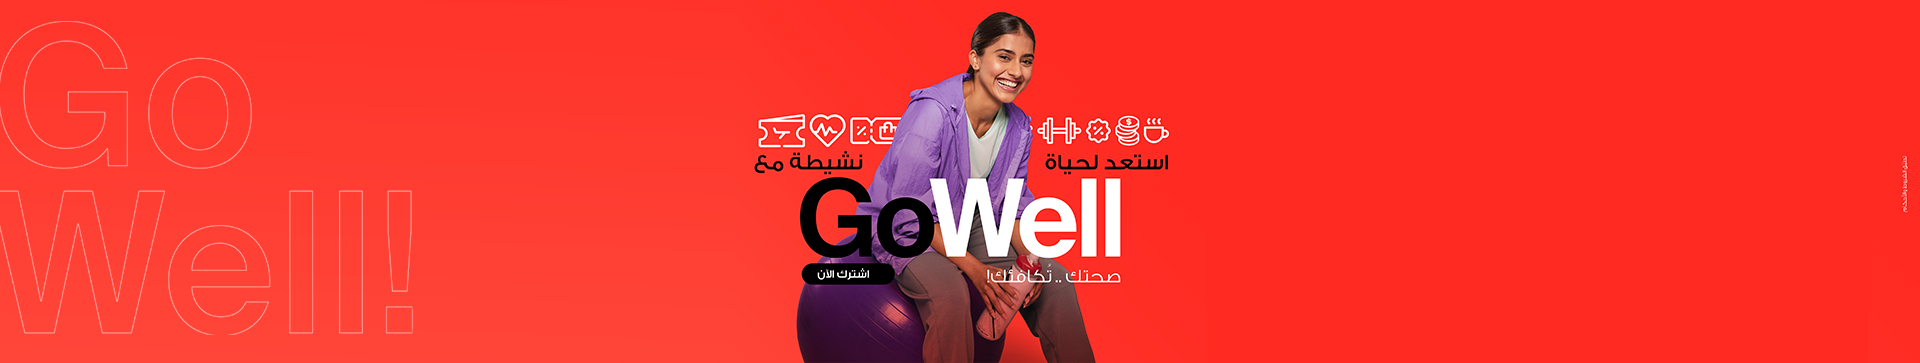 etisalat-by-eand-gowell-1920x363